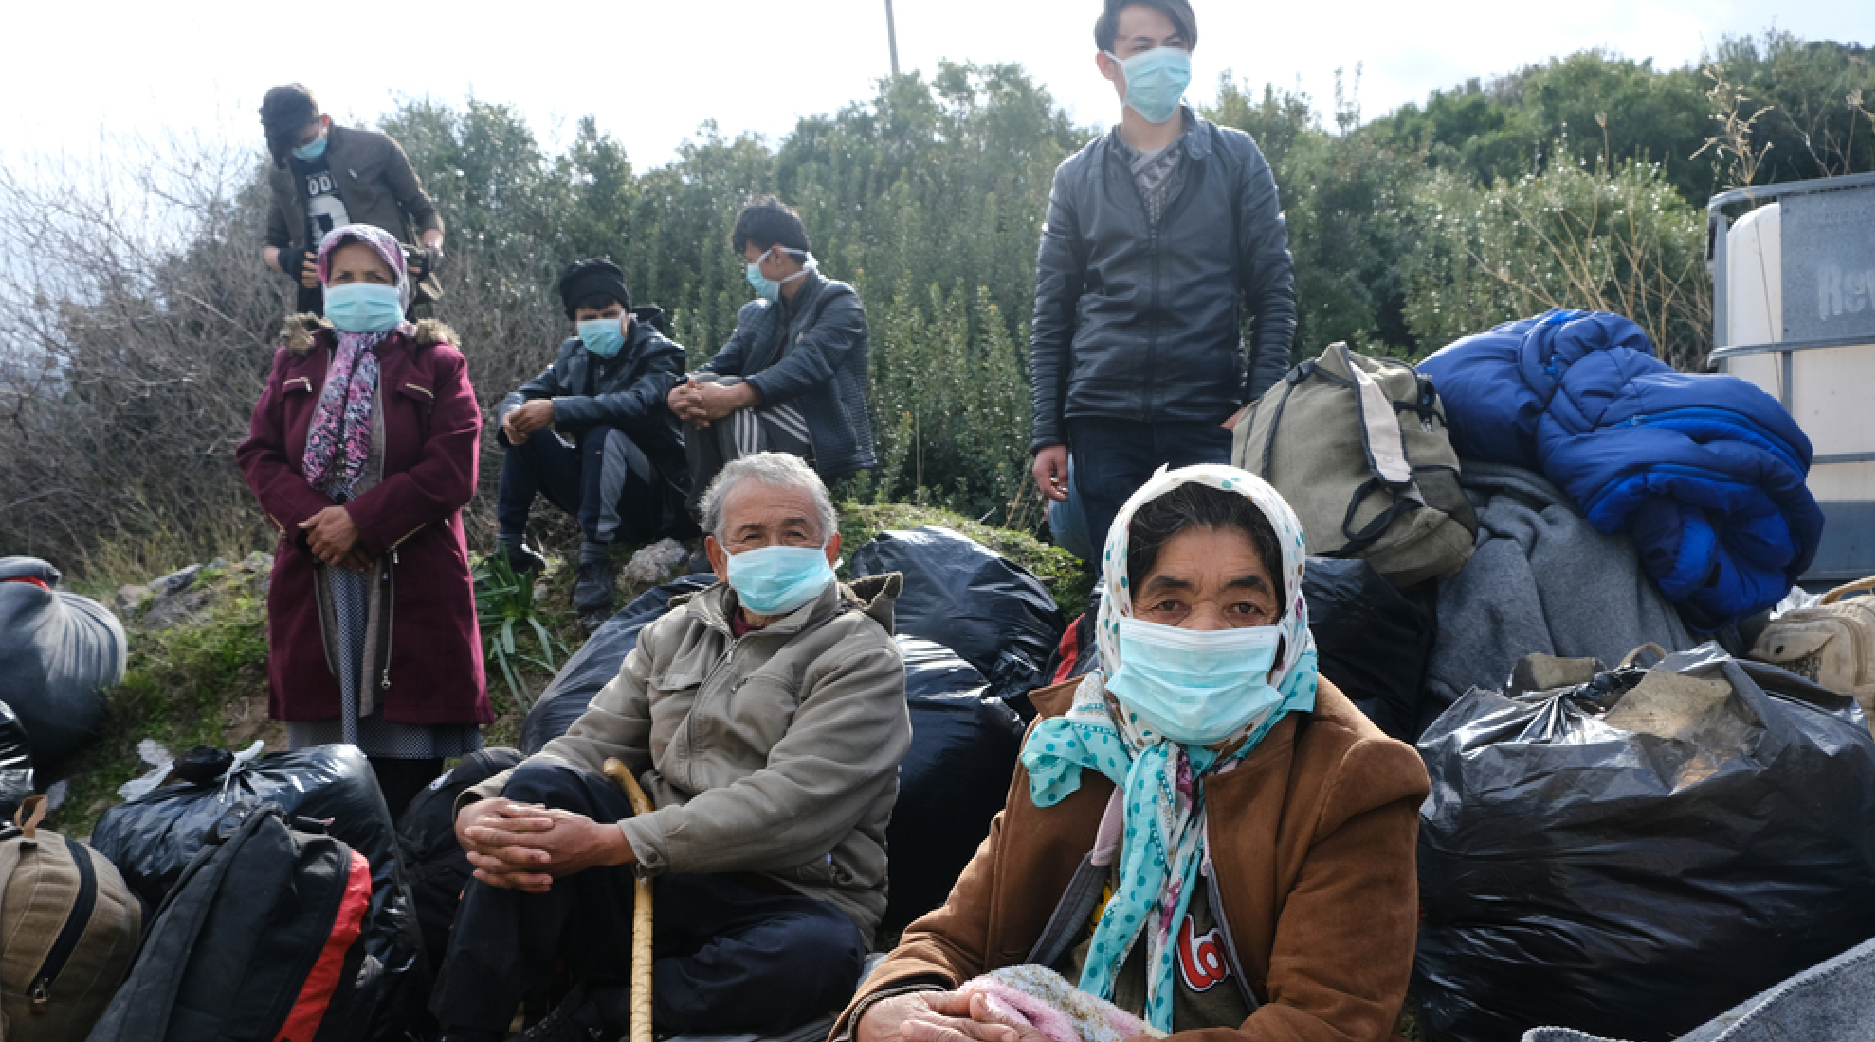 A group of migrants sitting on the ground with bags